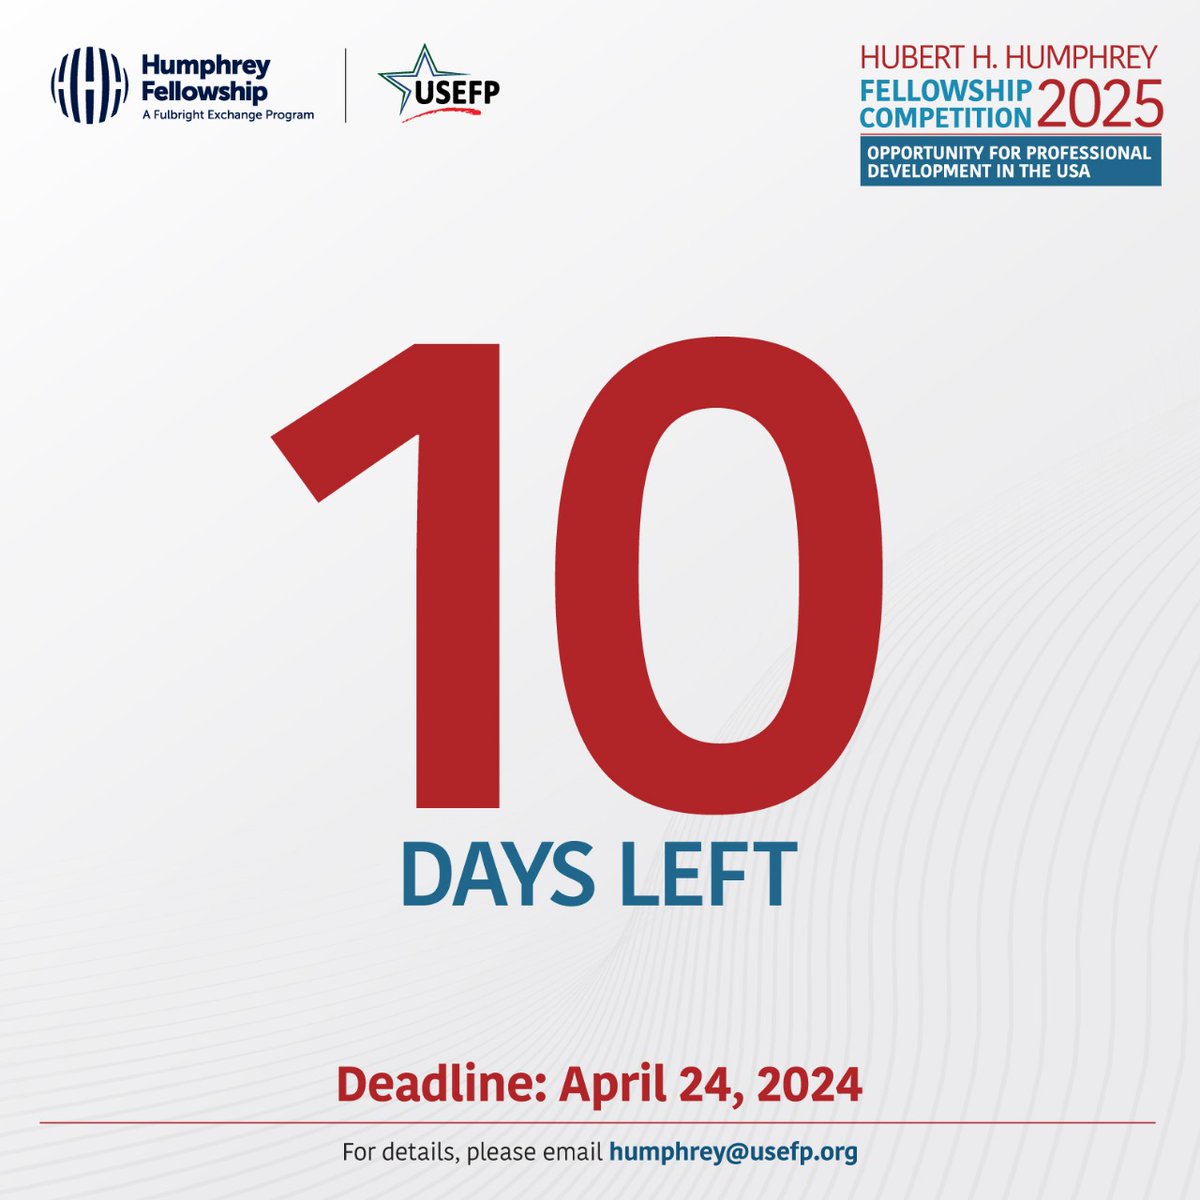 REMINDER: The 2025 Hubert H. Humphrey Fellowship Program deadline is approaching. Take the Duolingo English Test and submit your application early to avoid any last-minute inconvenience. To apply, visit usefp.org #USEFP #Humphrey #USPAK #Fellowship